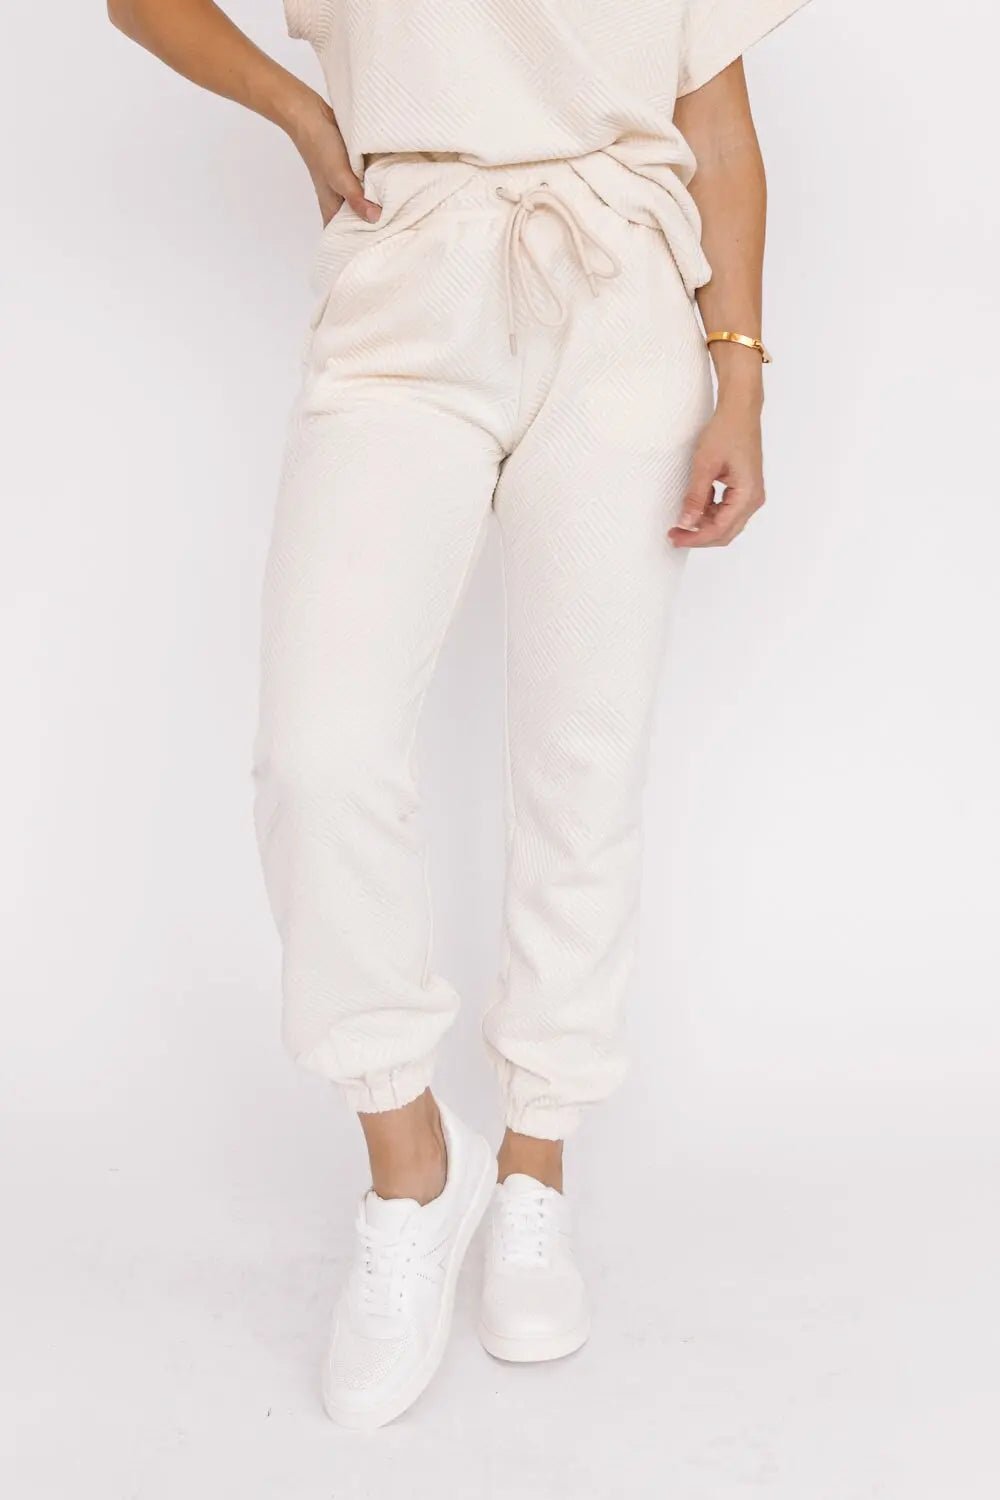 Weekend Vibe Cream Textured Joggers: Your Passport to Elevated Style